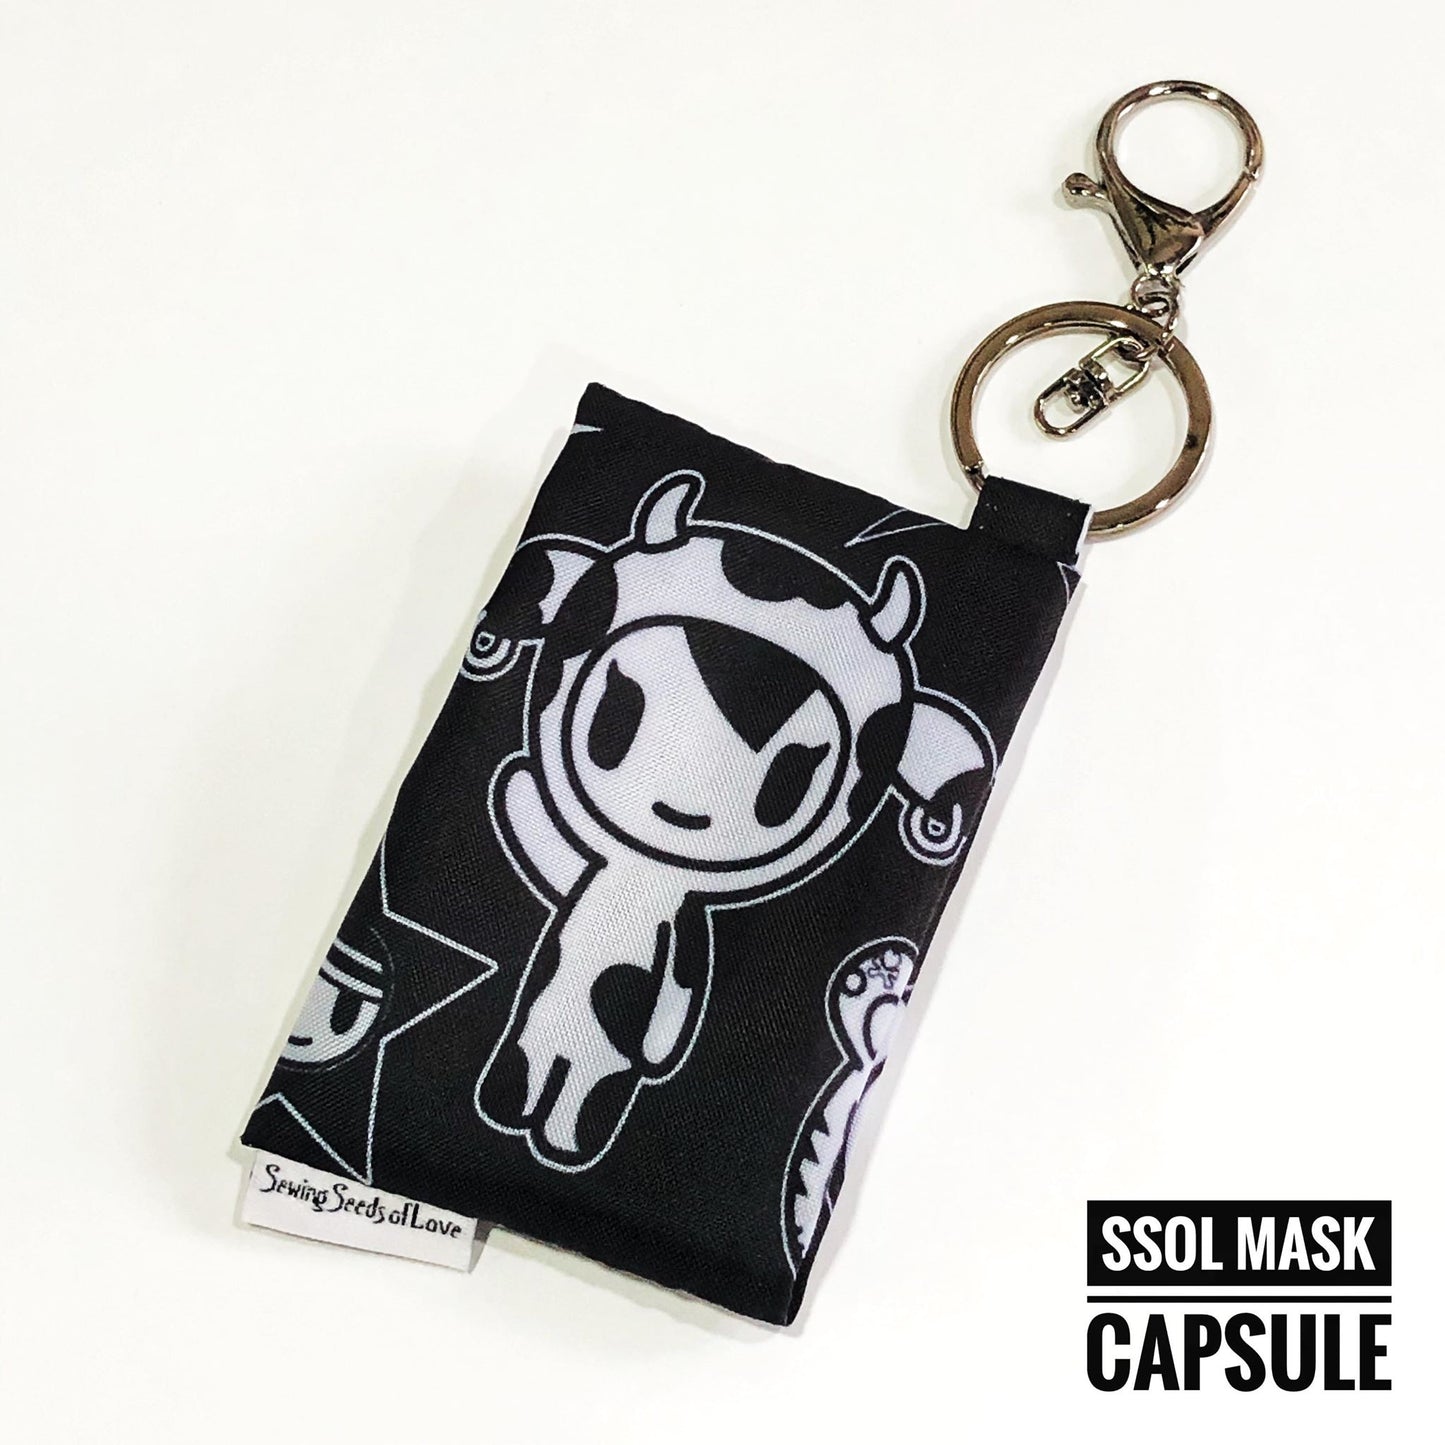 Mask Capsule - King's Court